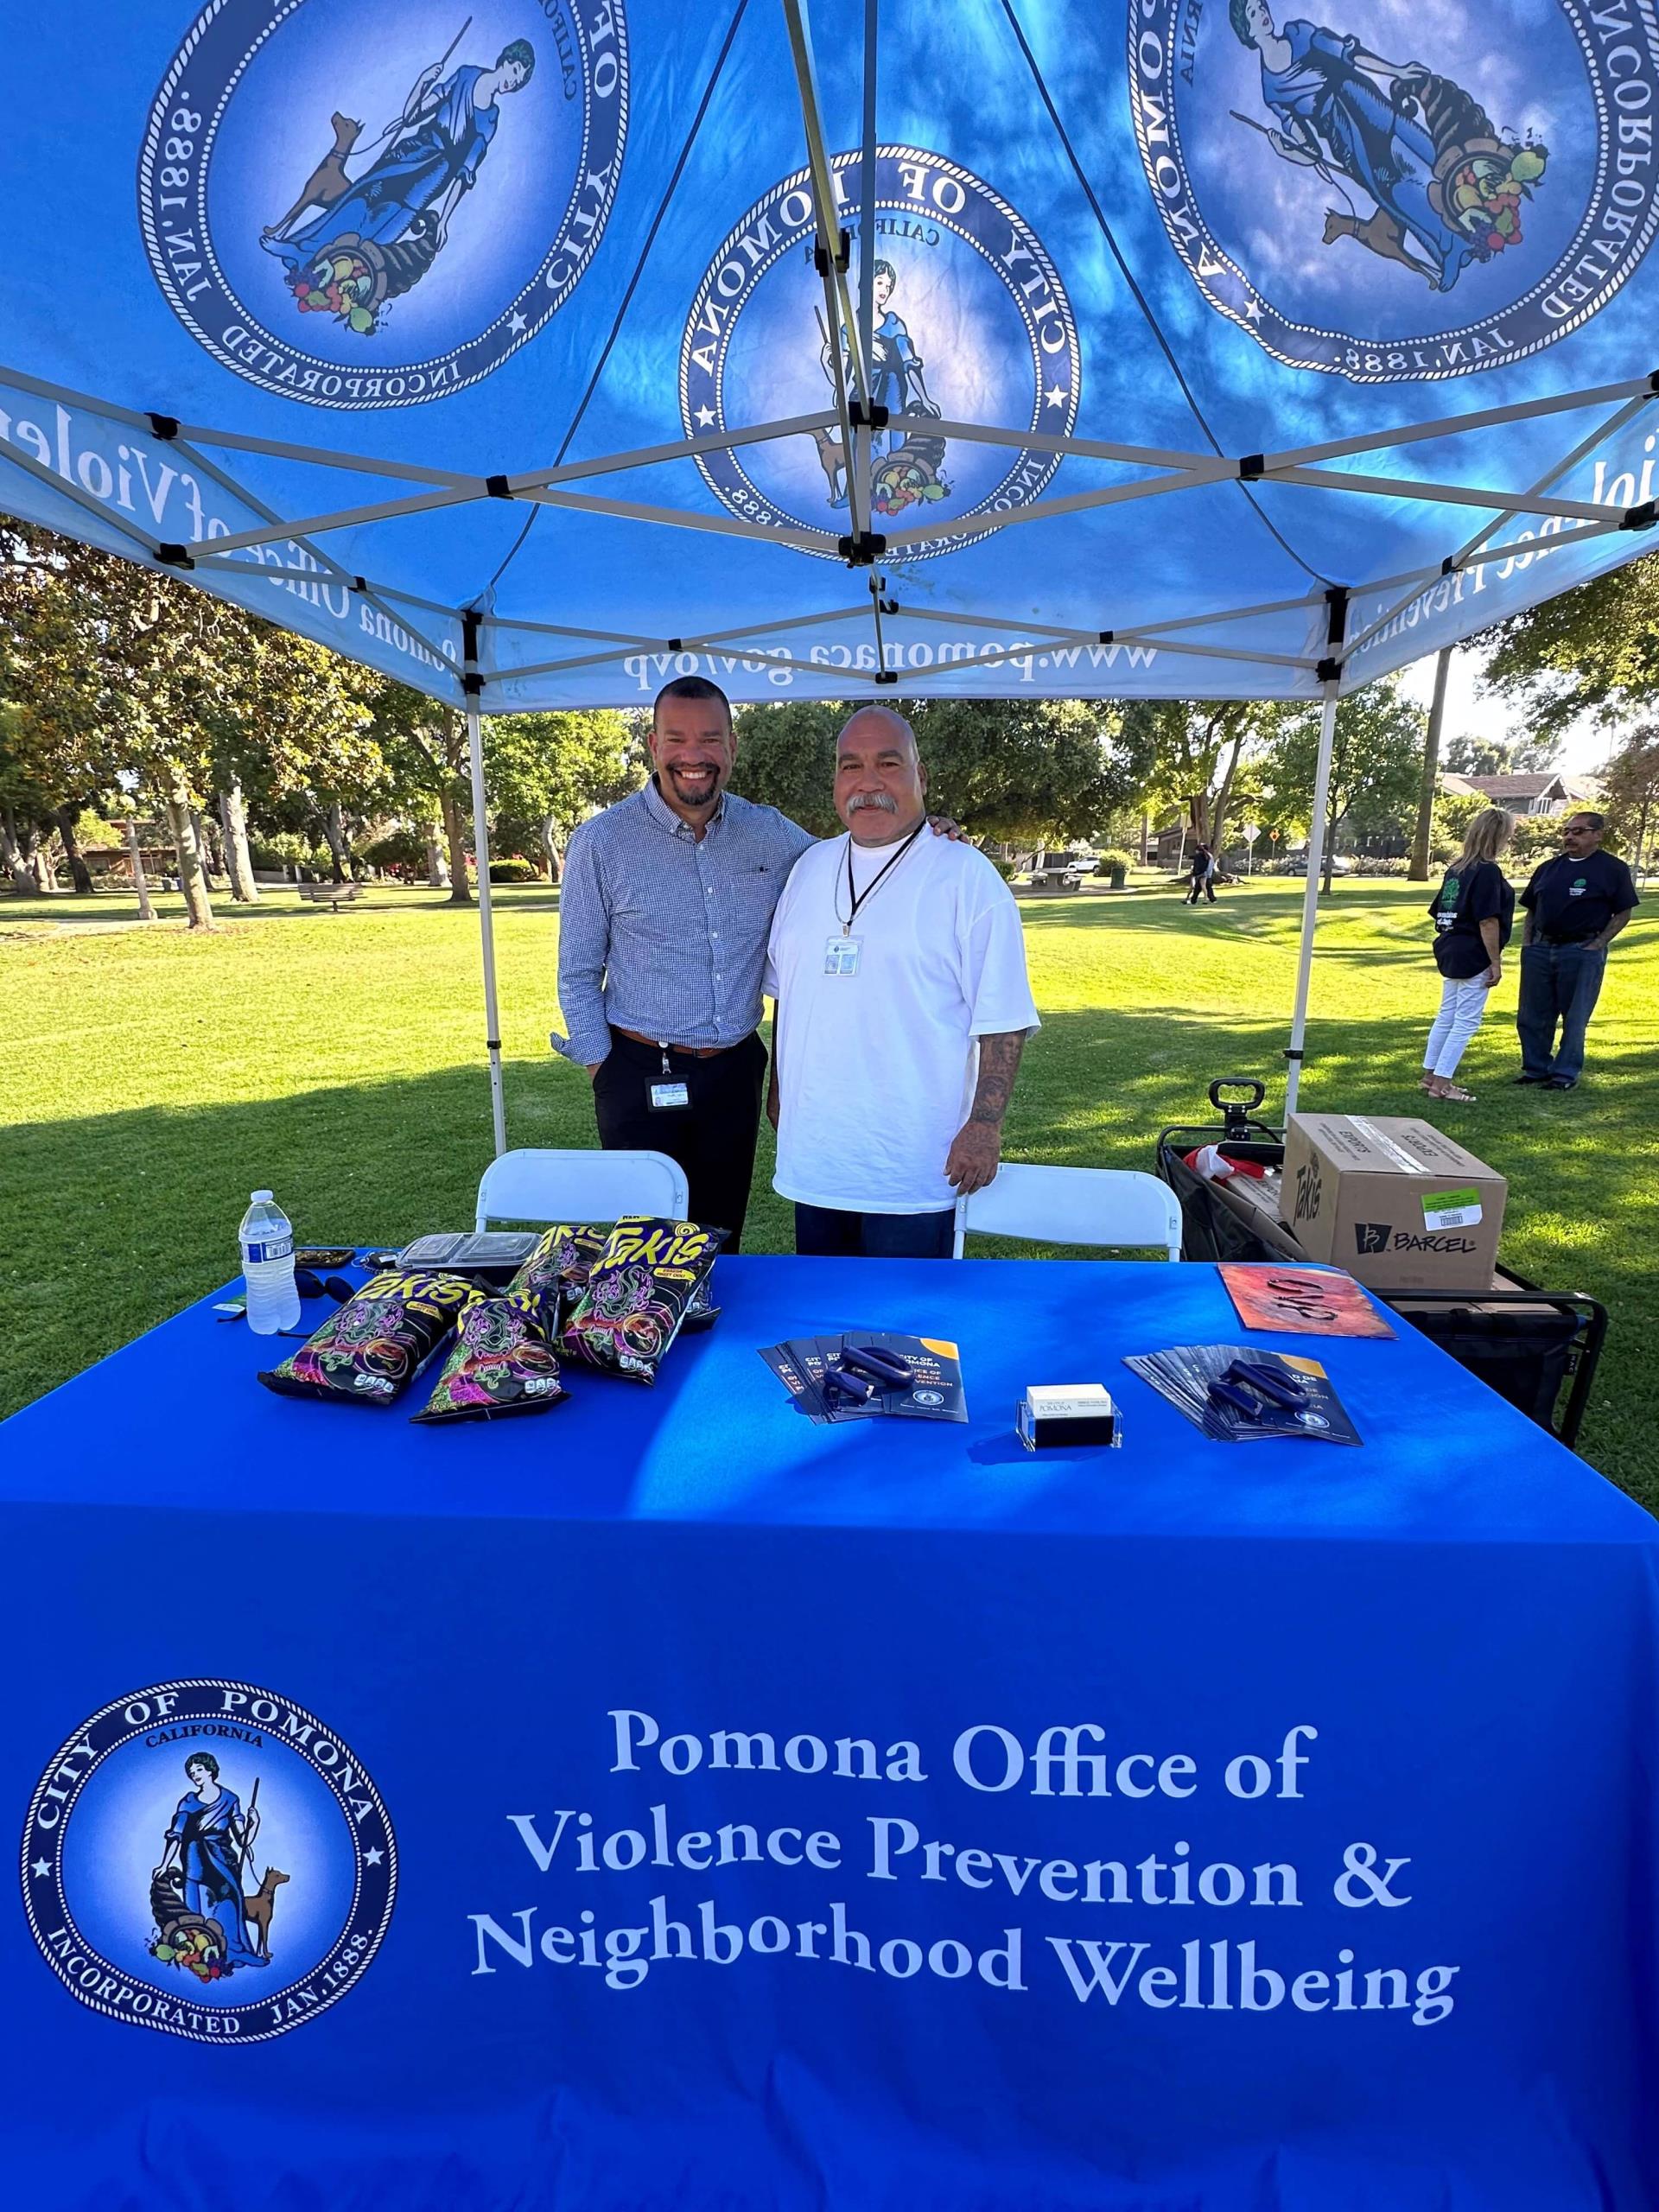 OVP manager Pedro with Steven Montes at pop up event